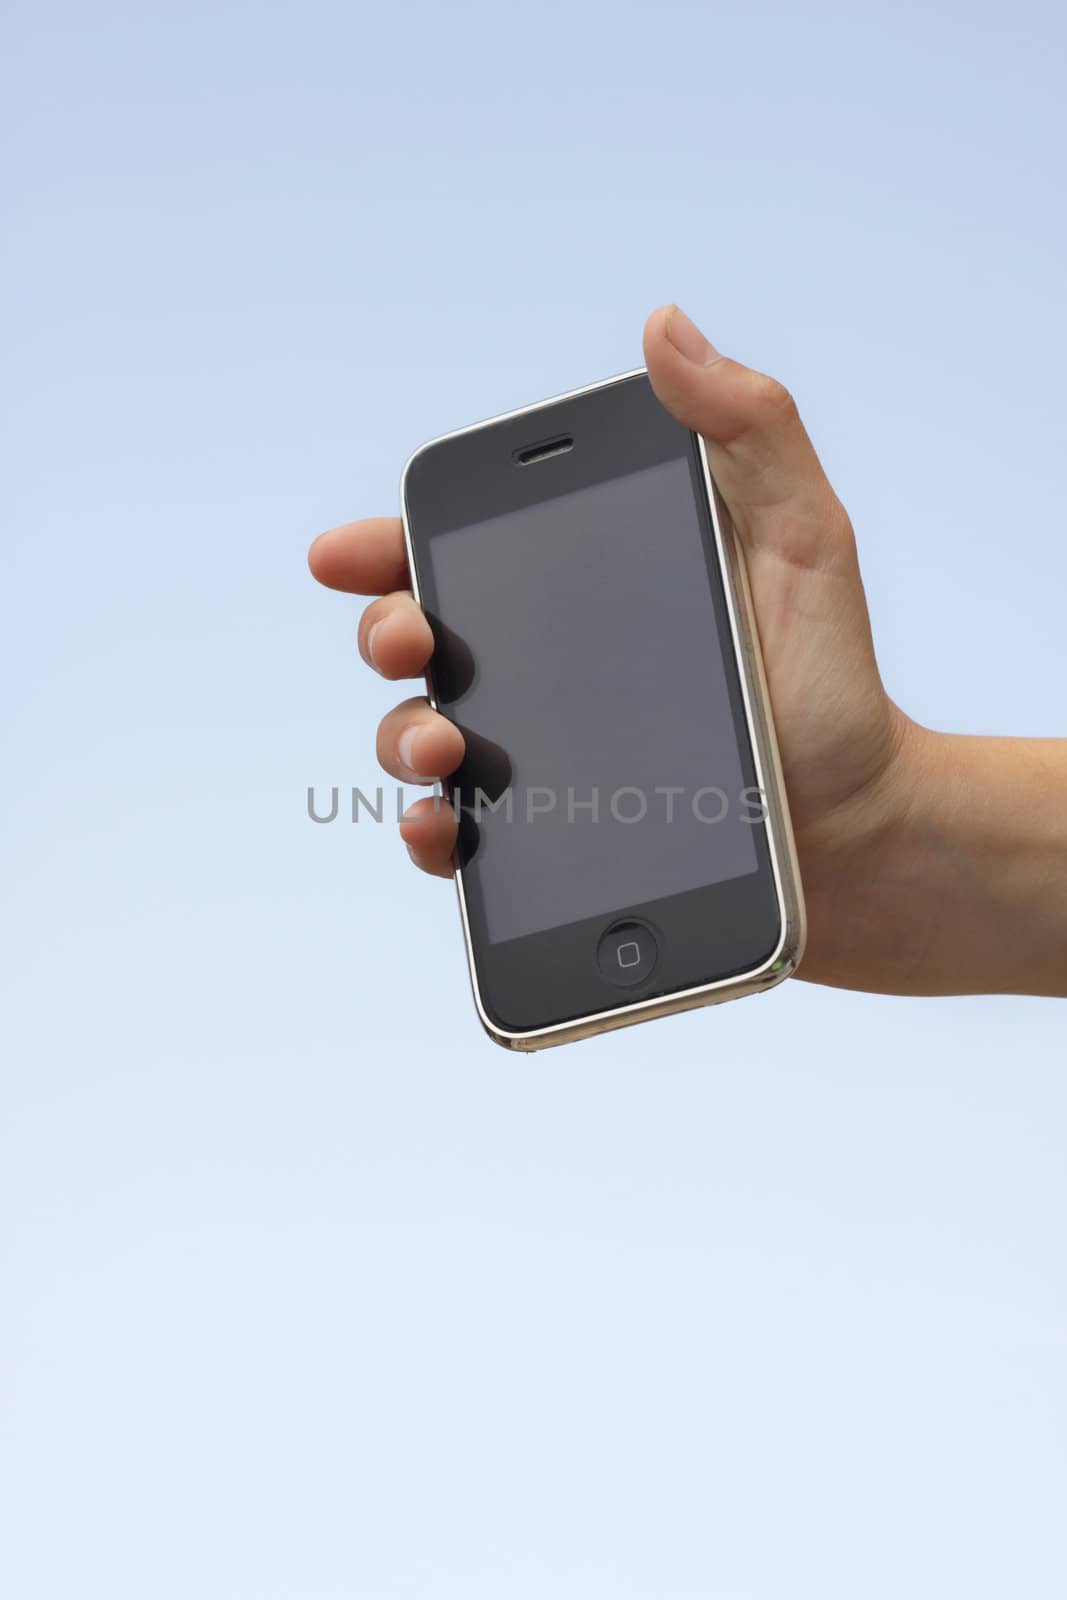 Hand holding up an iphone with a plastic invinsible shield cover towards a blue sky